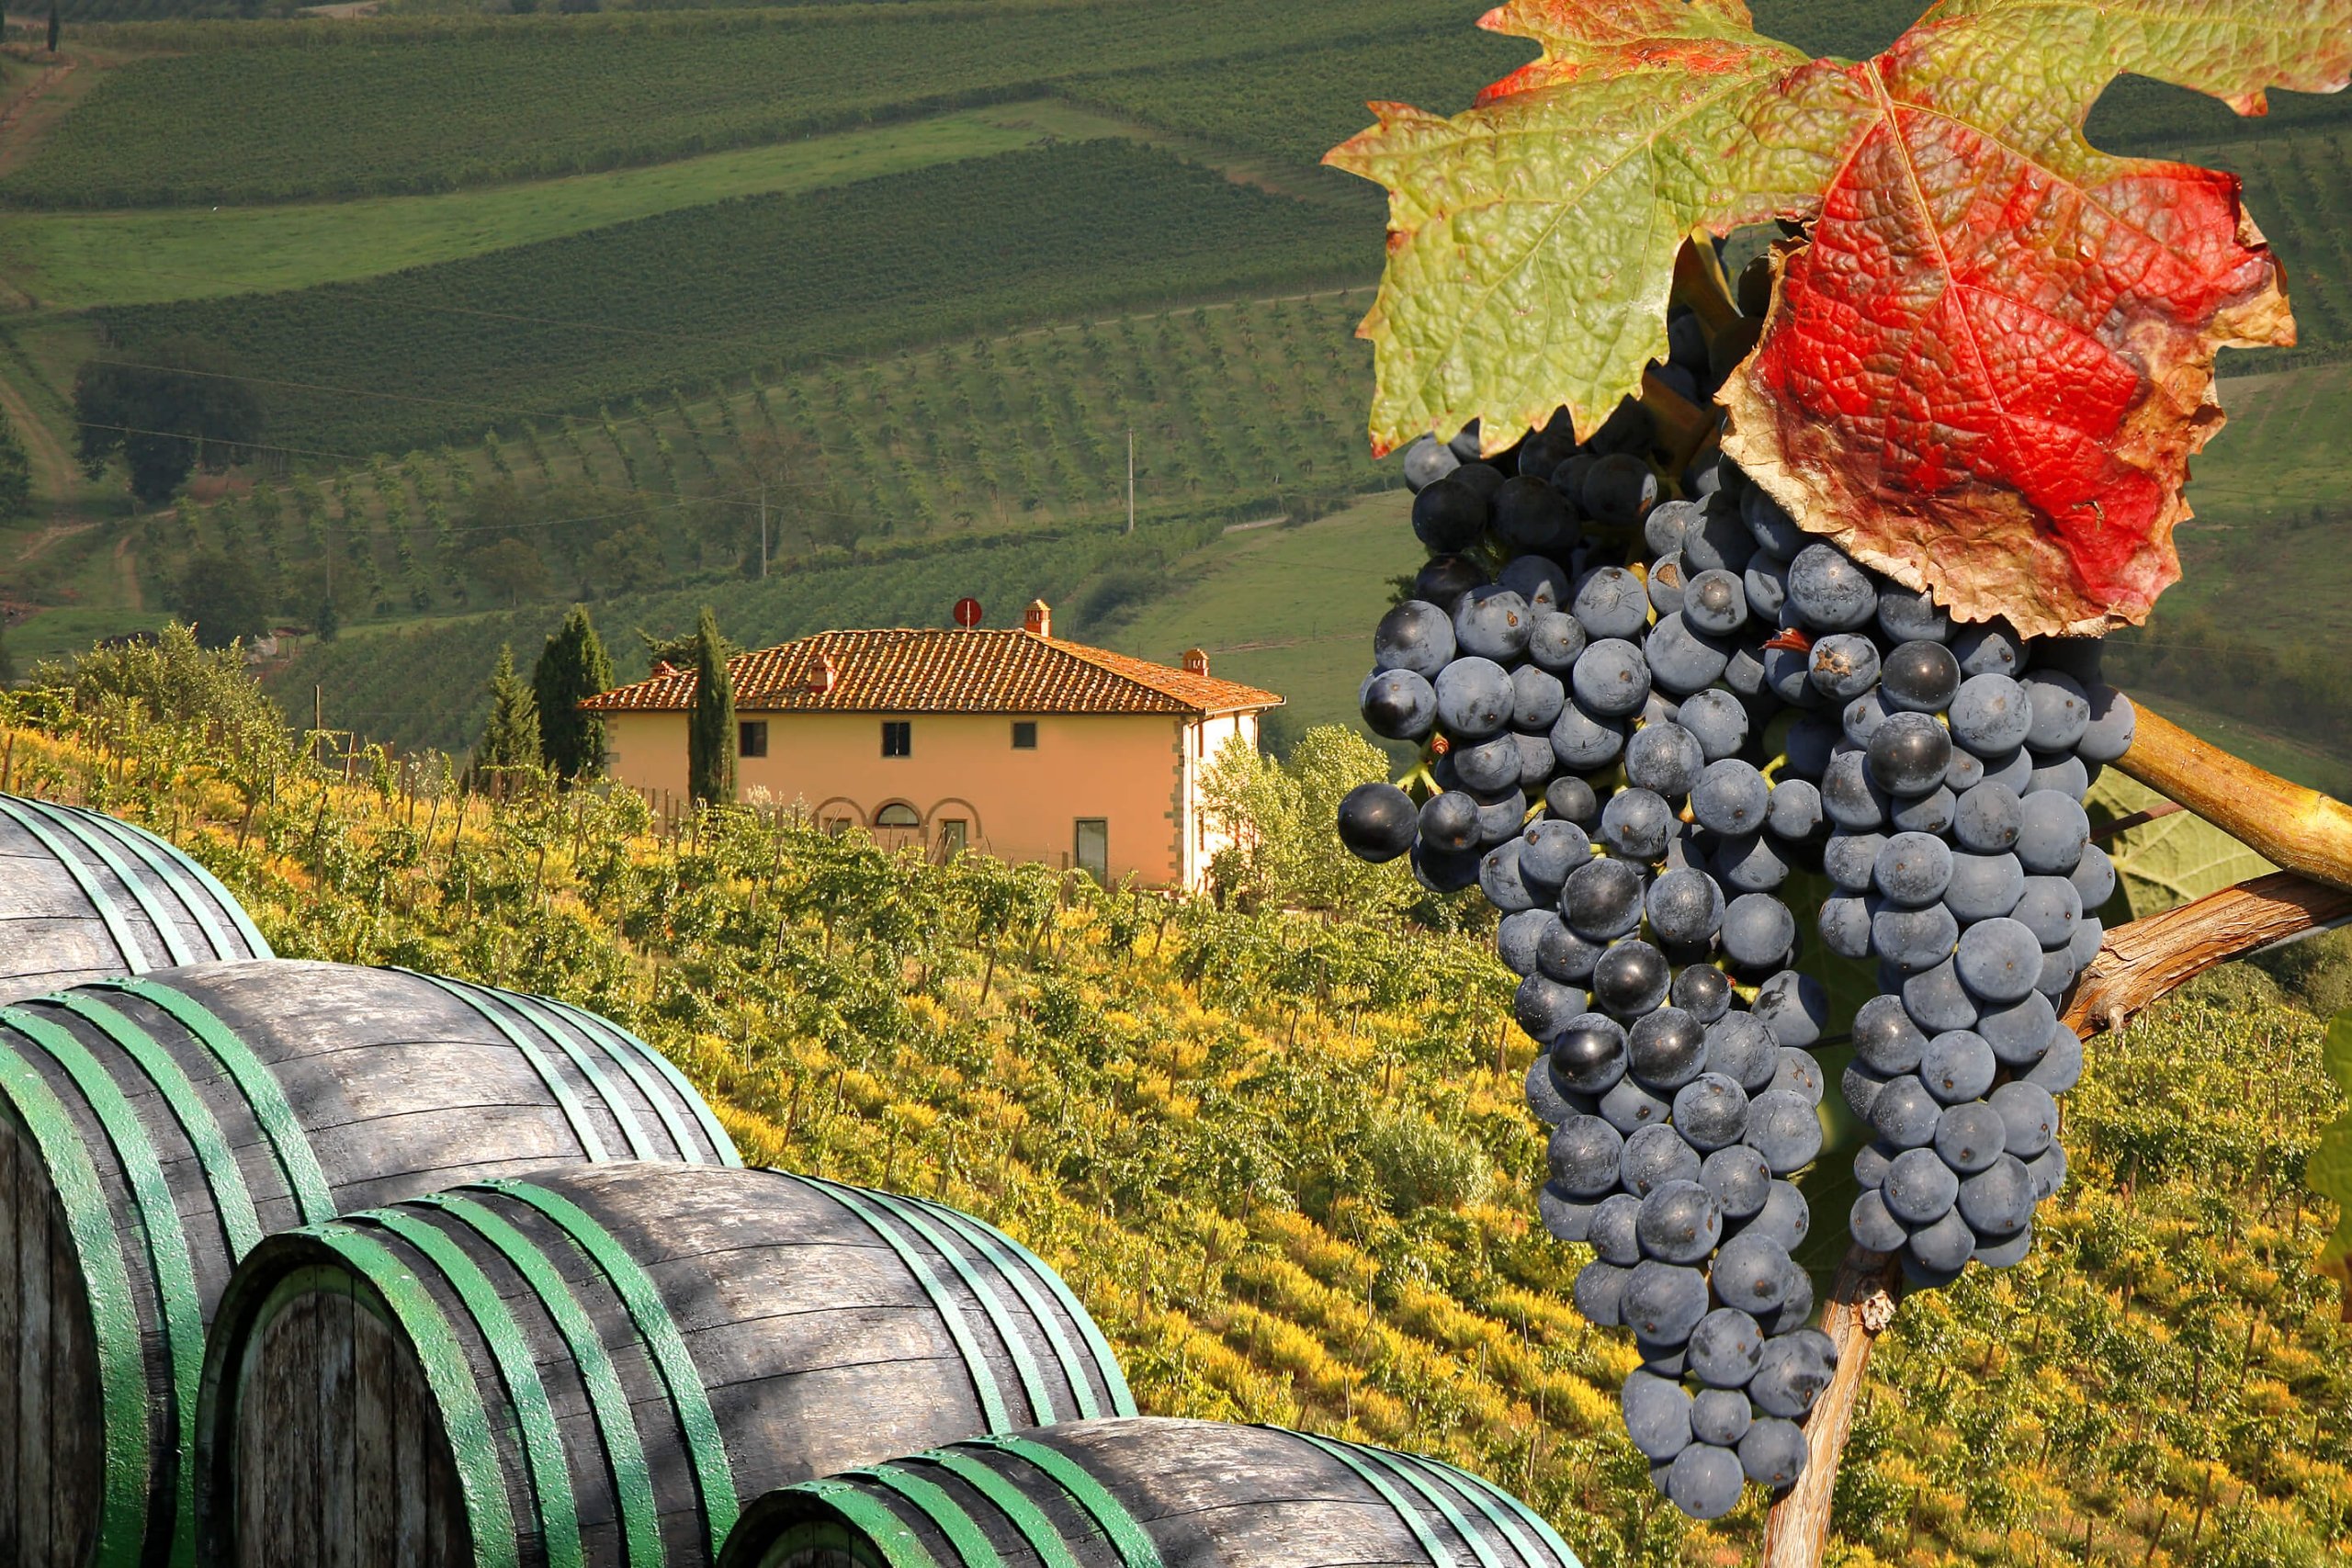 italy vineyard images